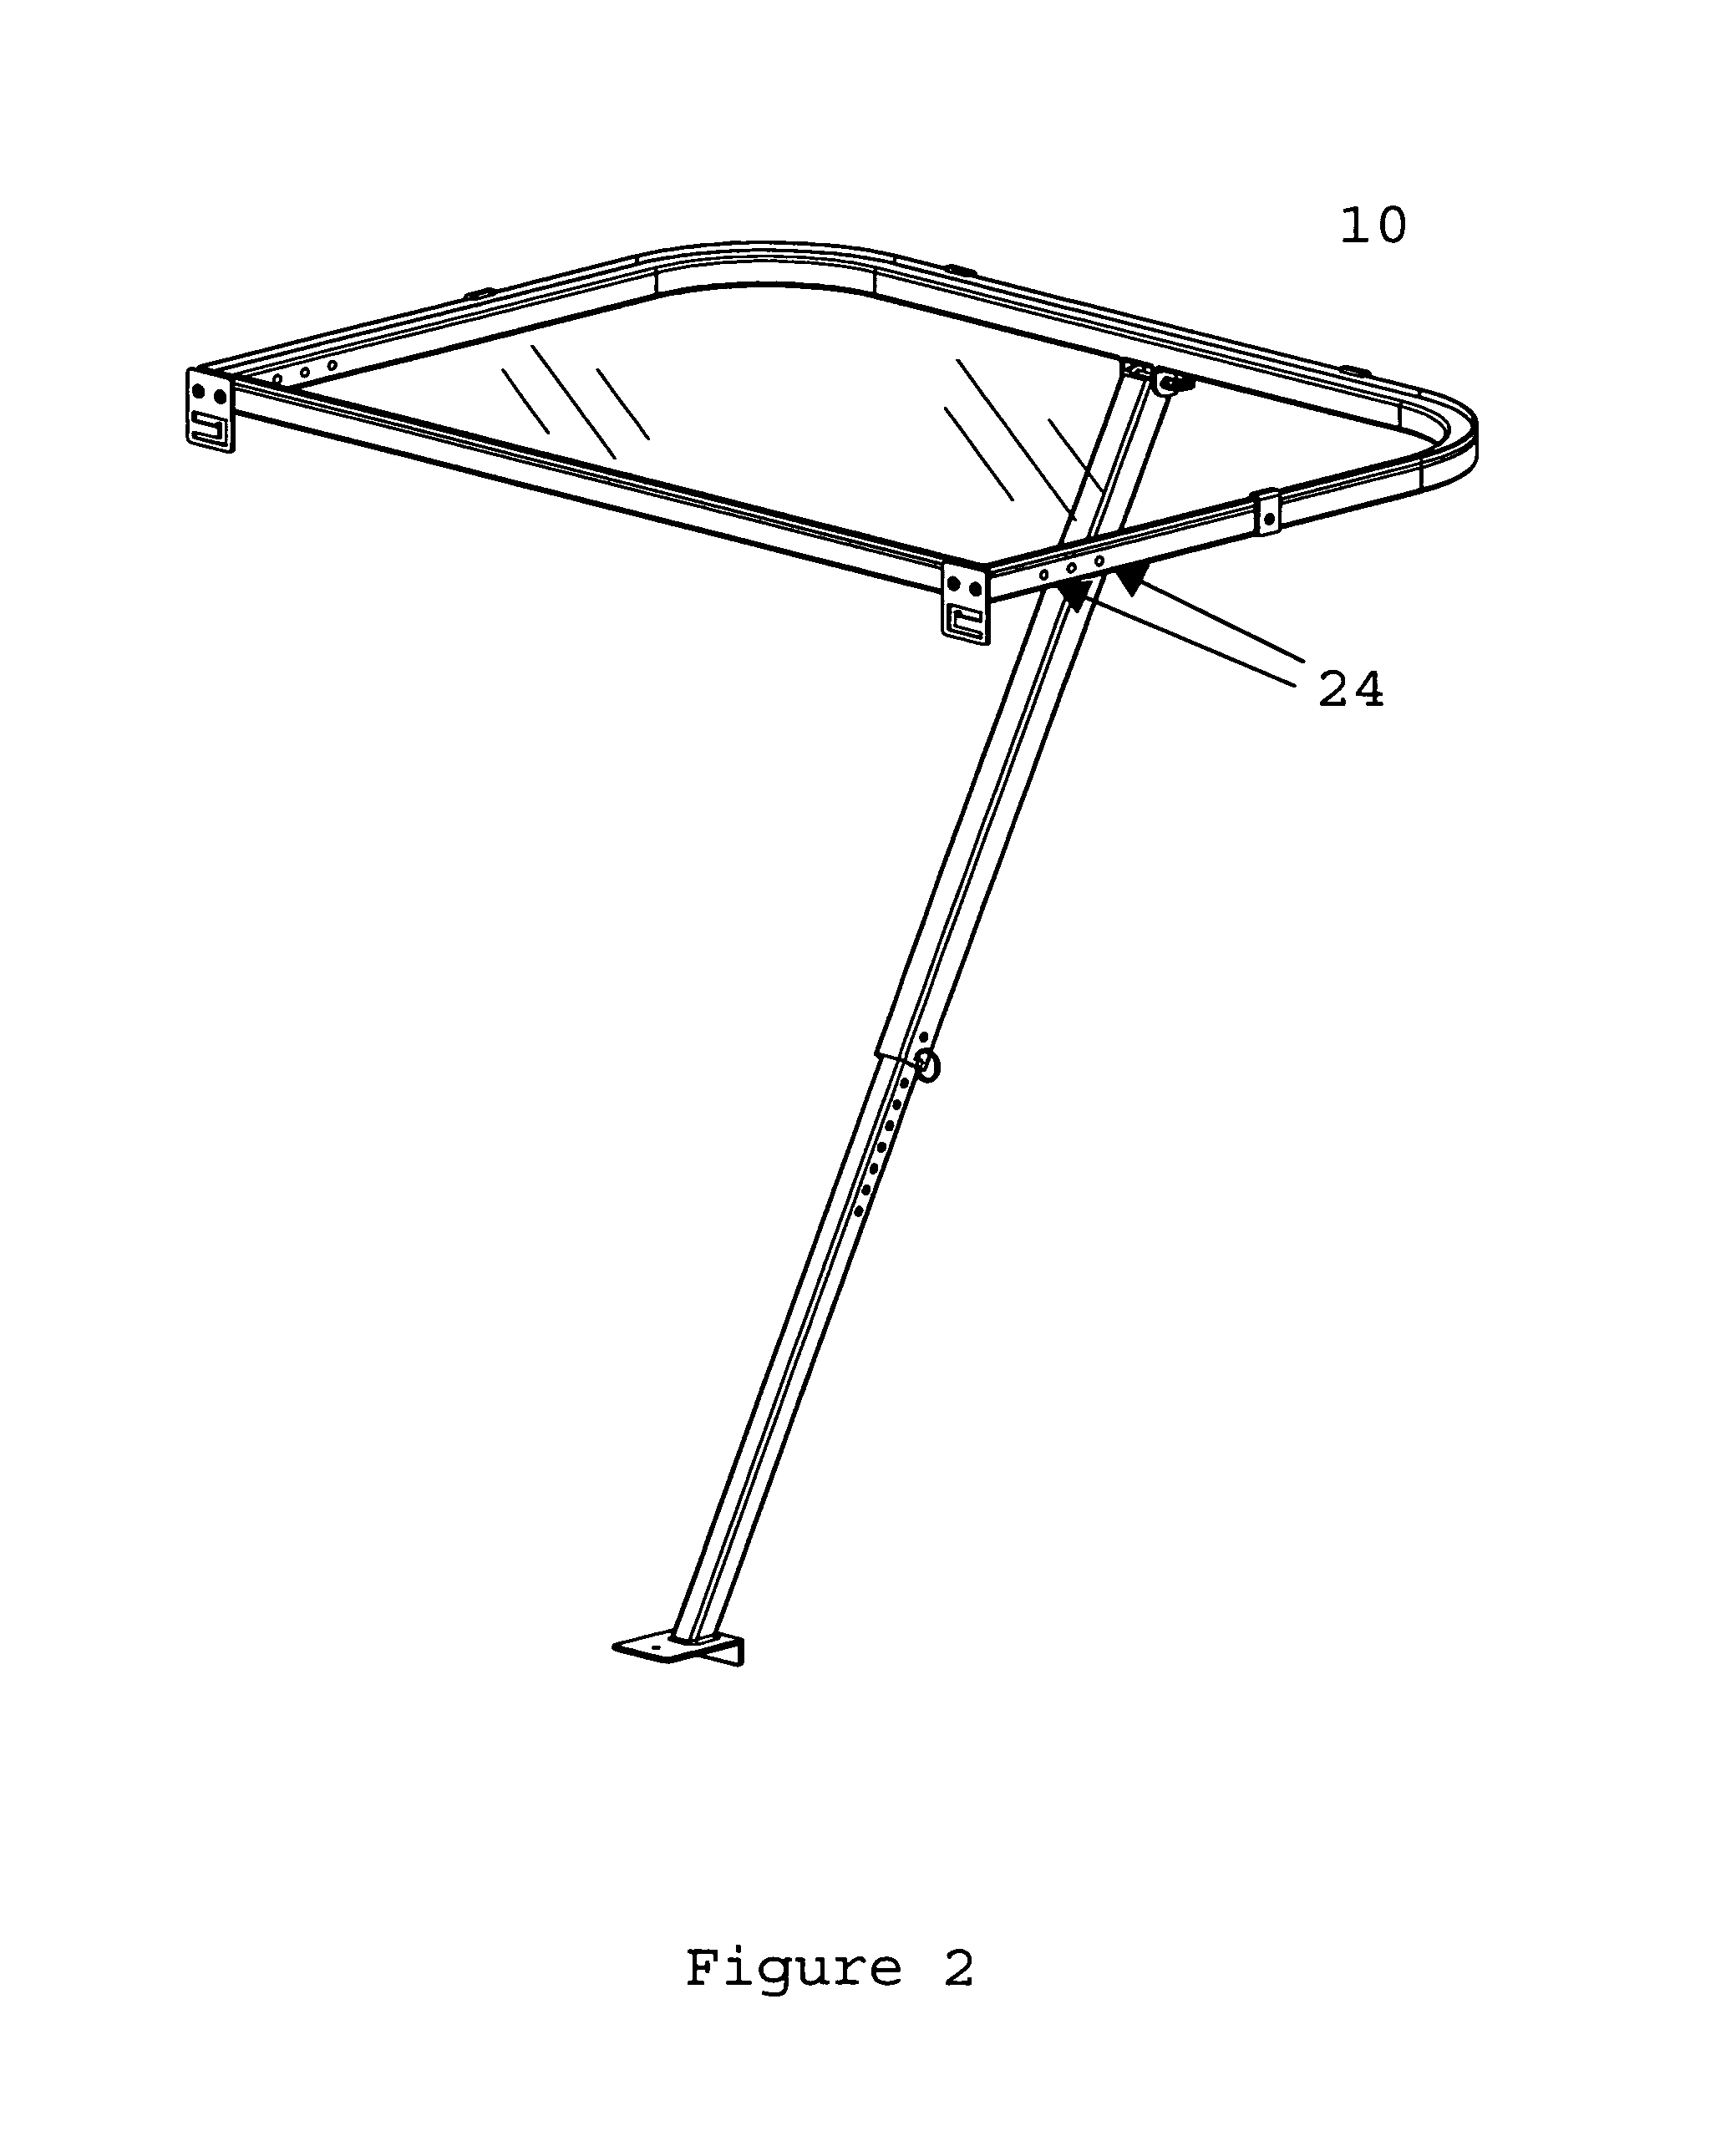 Railing extension device and method therefore